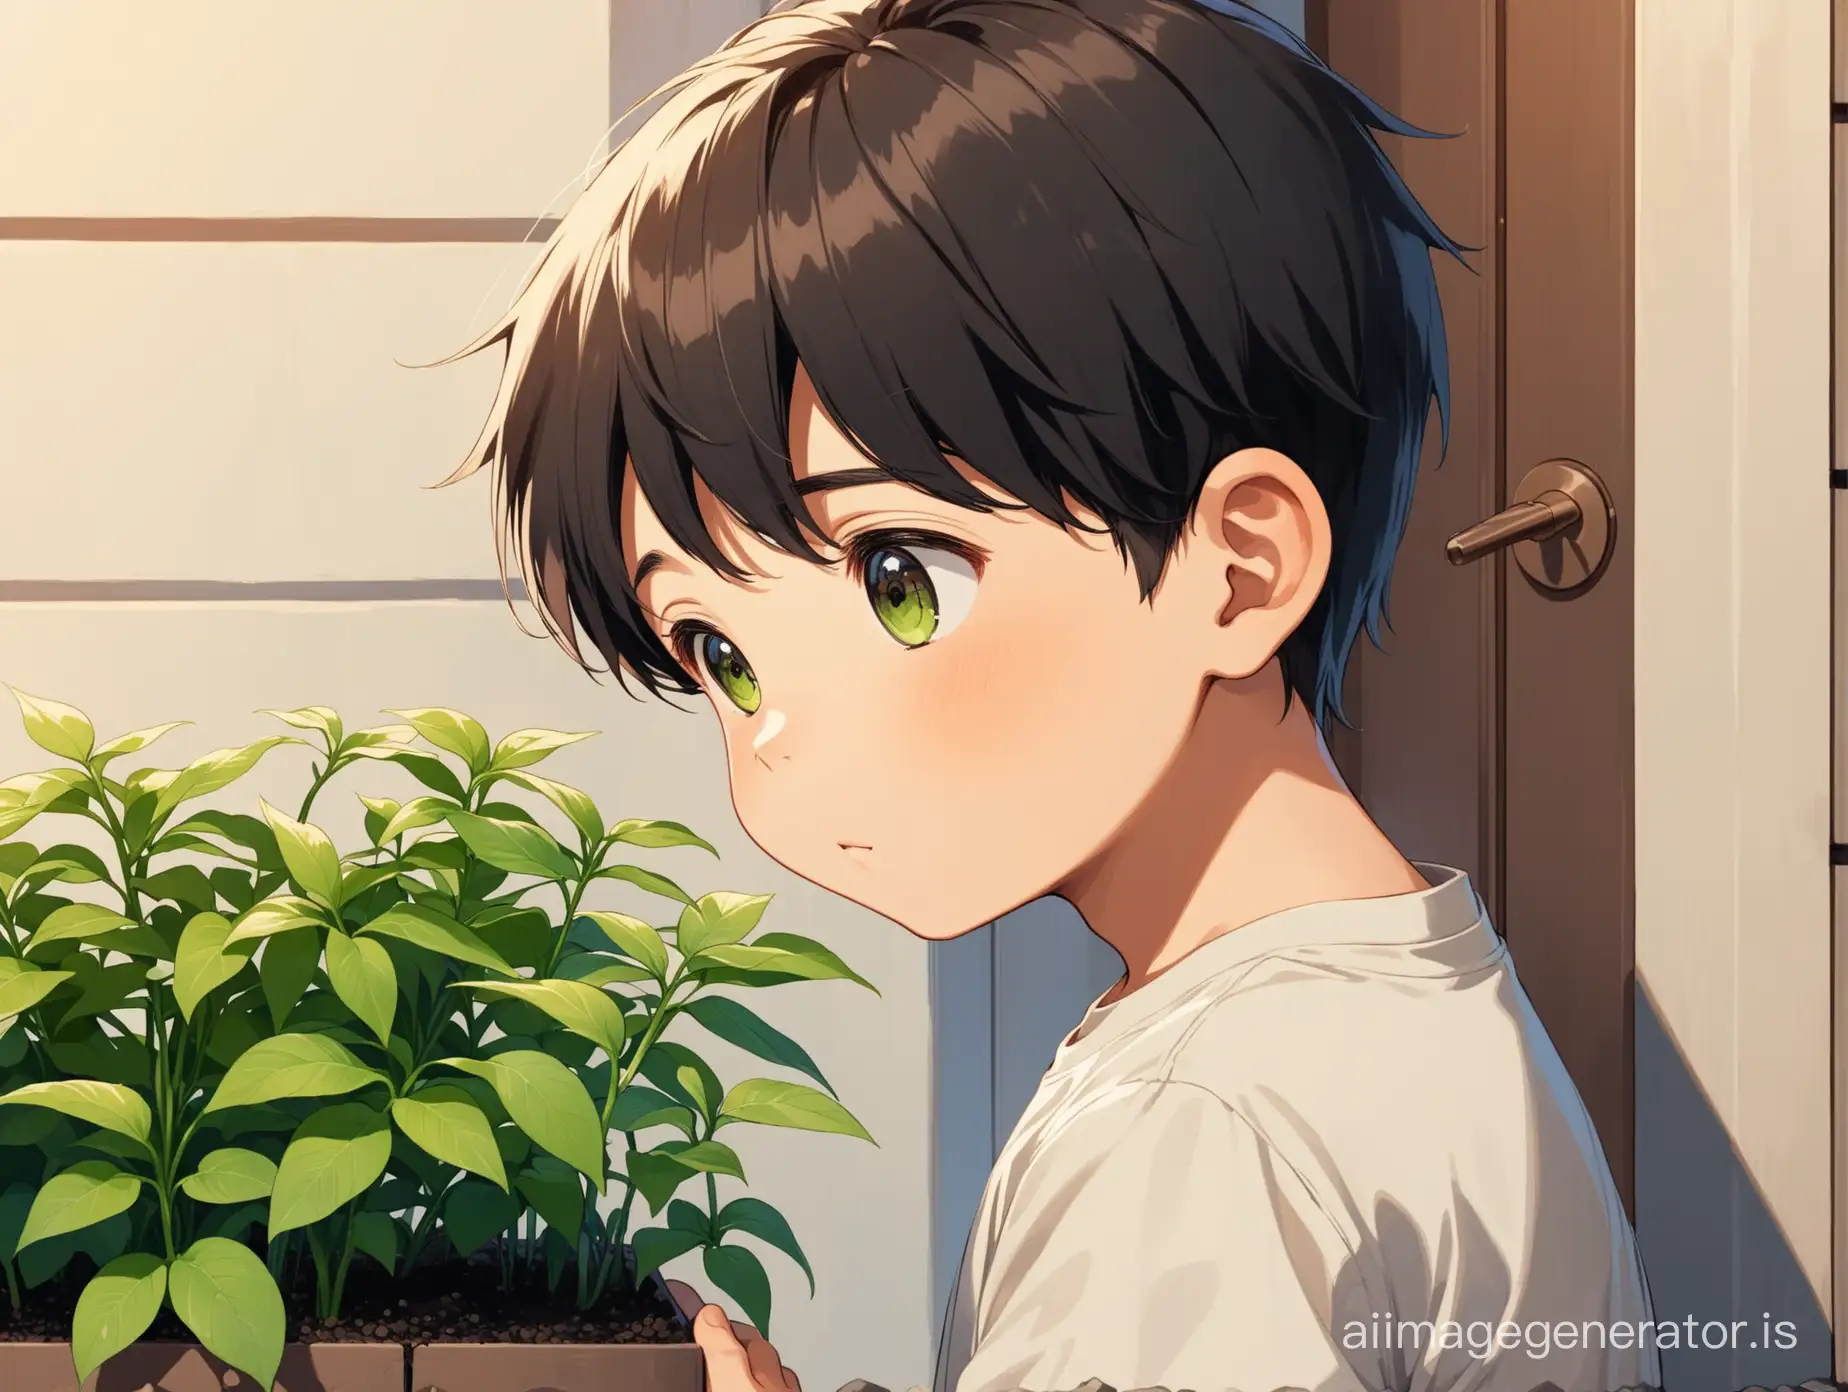 Curious-Child-Observing-Outdoor-Plant-Growth